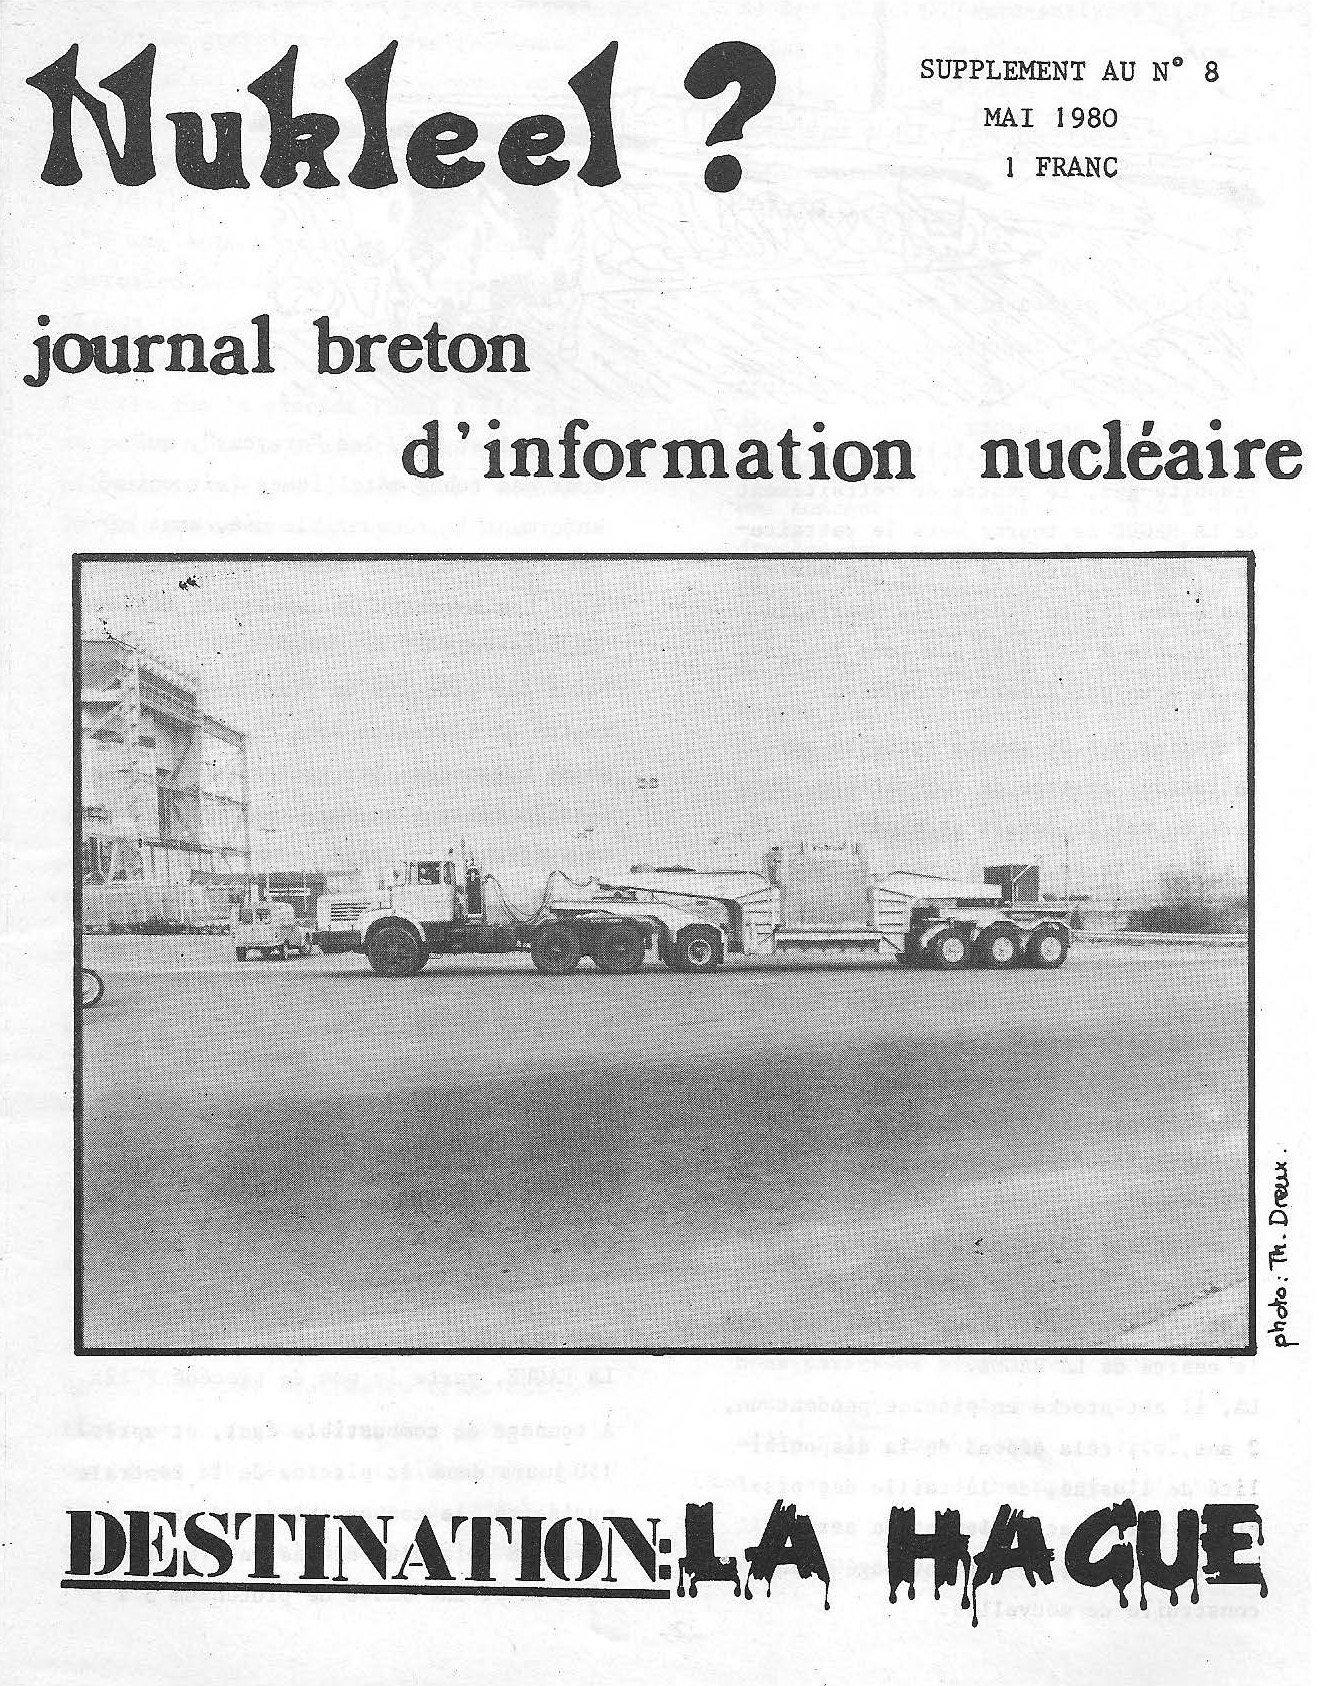 nr 8 supplement, May 1980